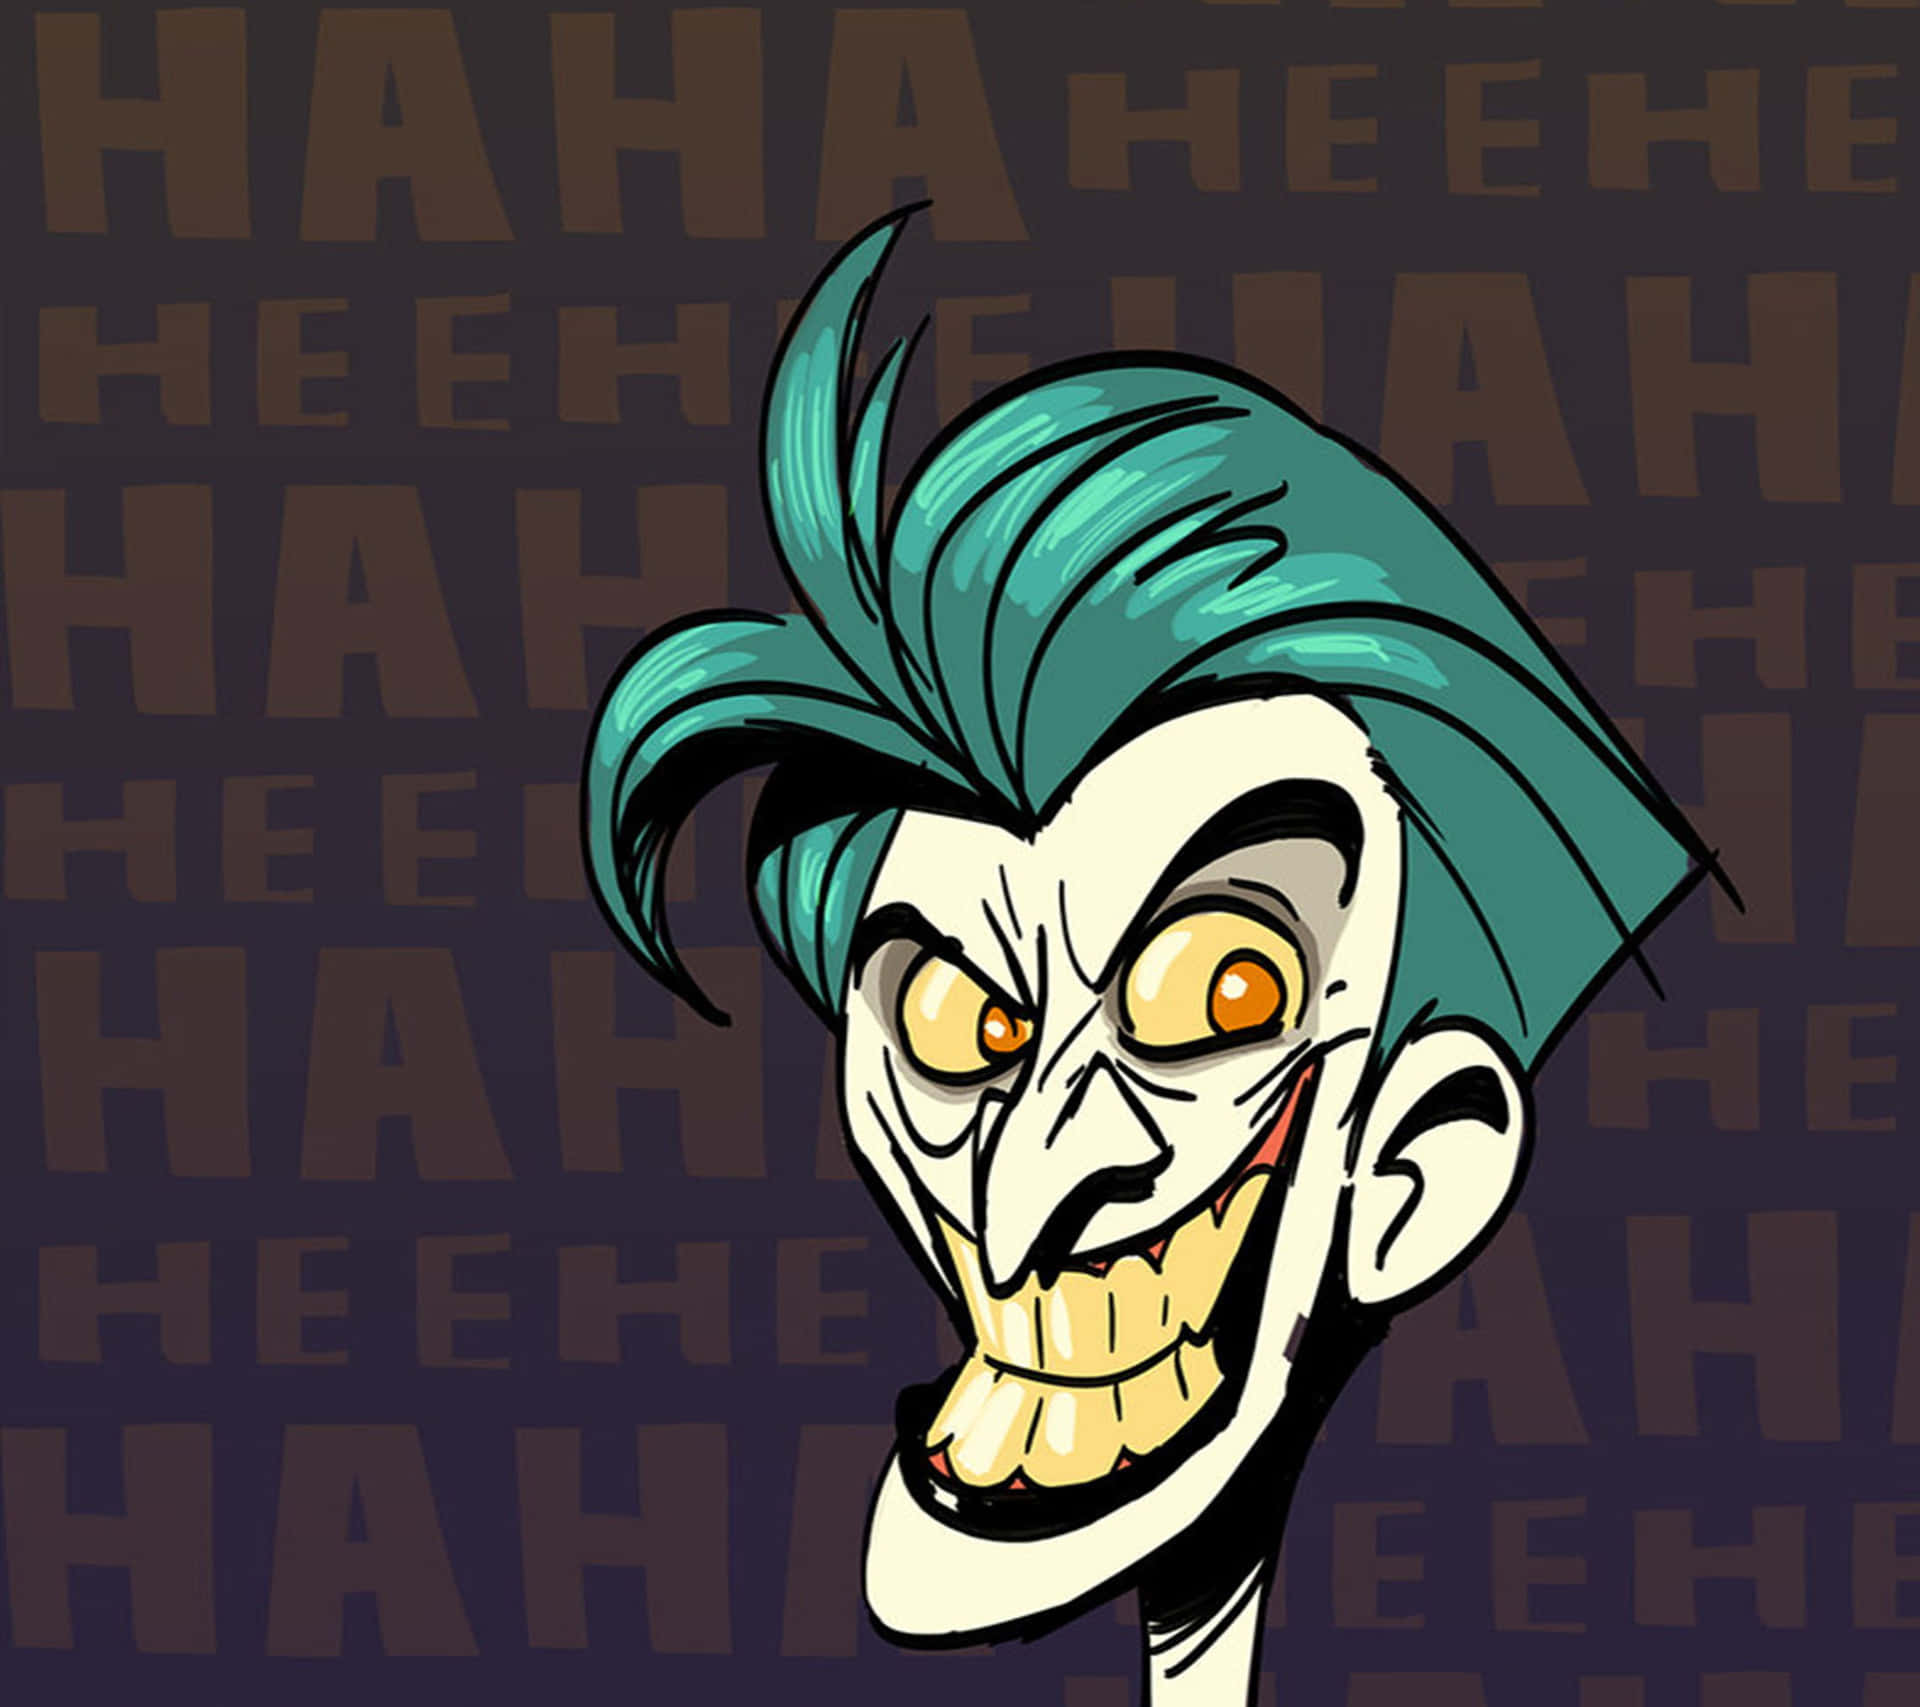 A Maniacal Laugh: The Joker Unleashed Background